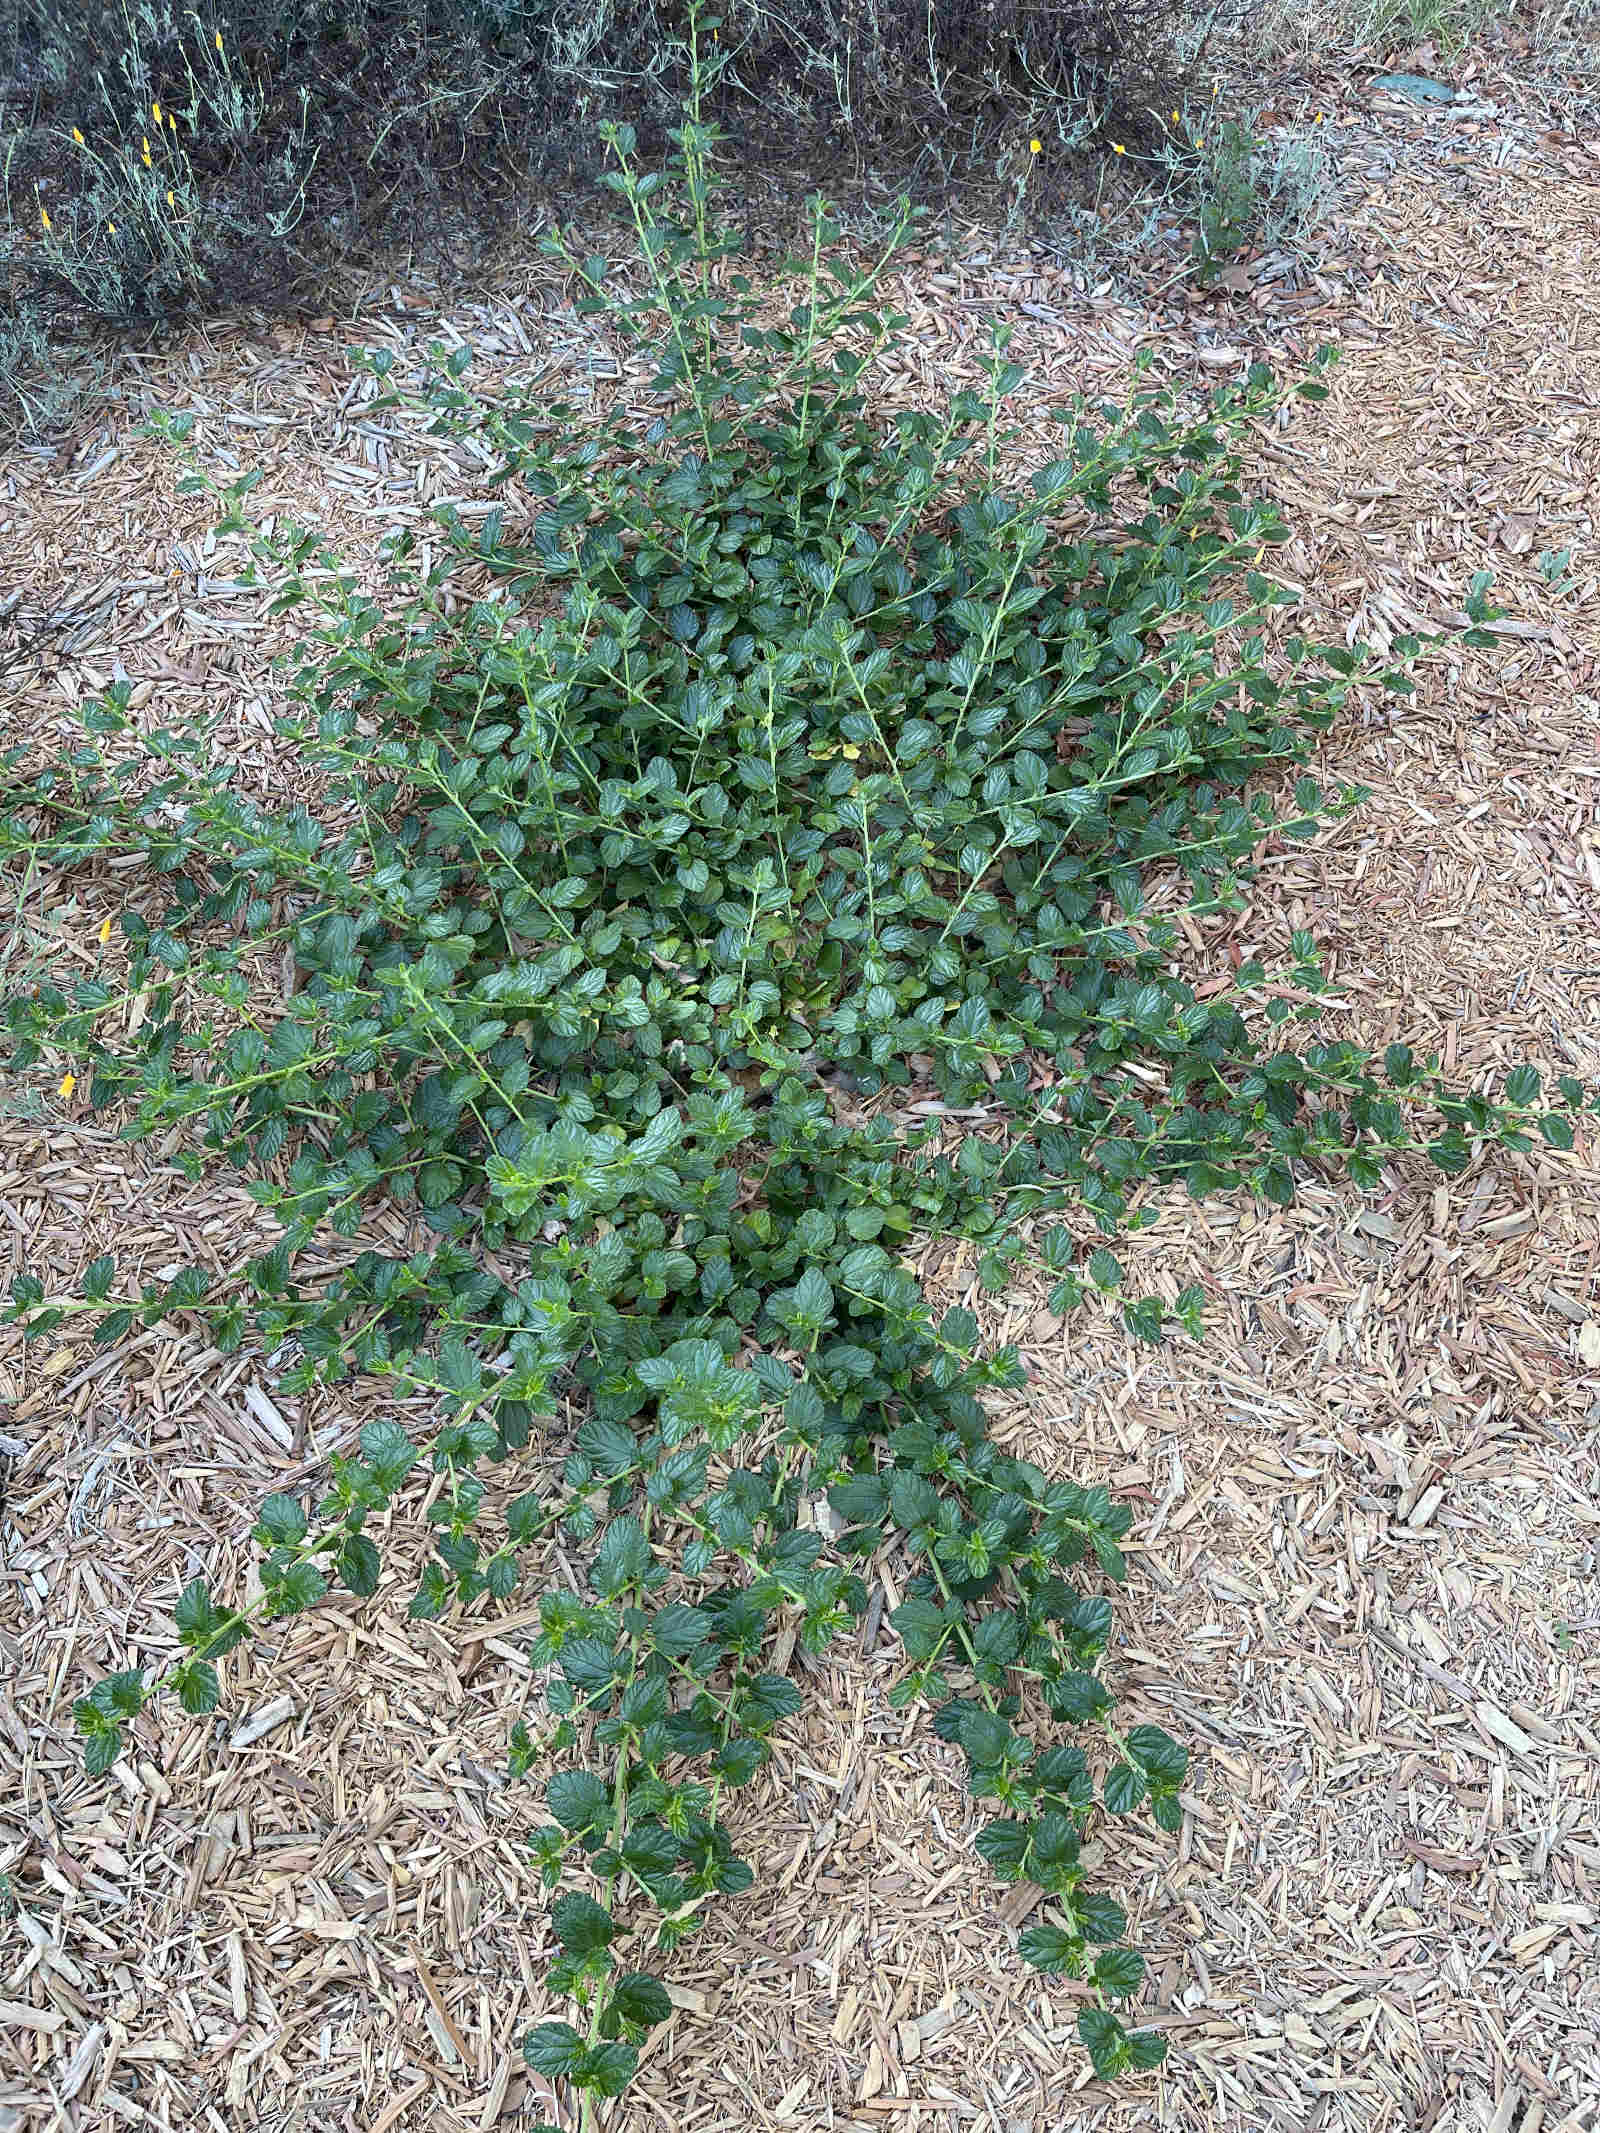 A spreading ceanothus plant growing in a yard. Light colored wood mulch covers the soil.